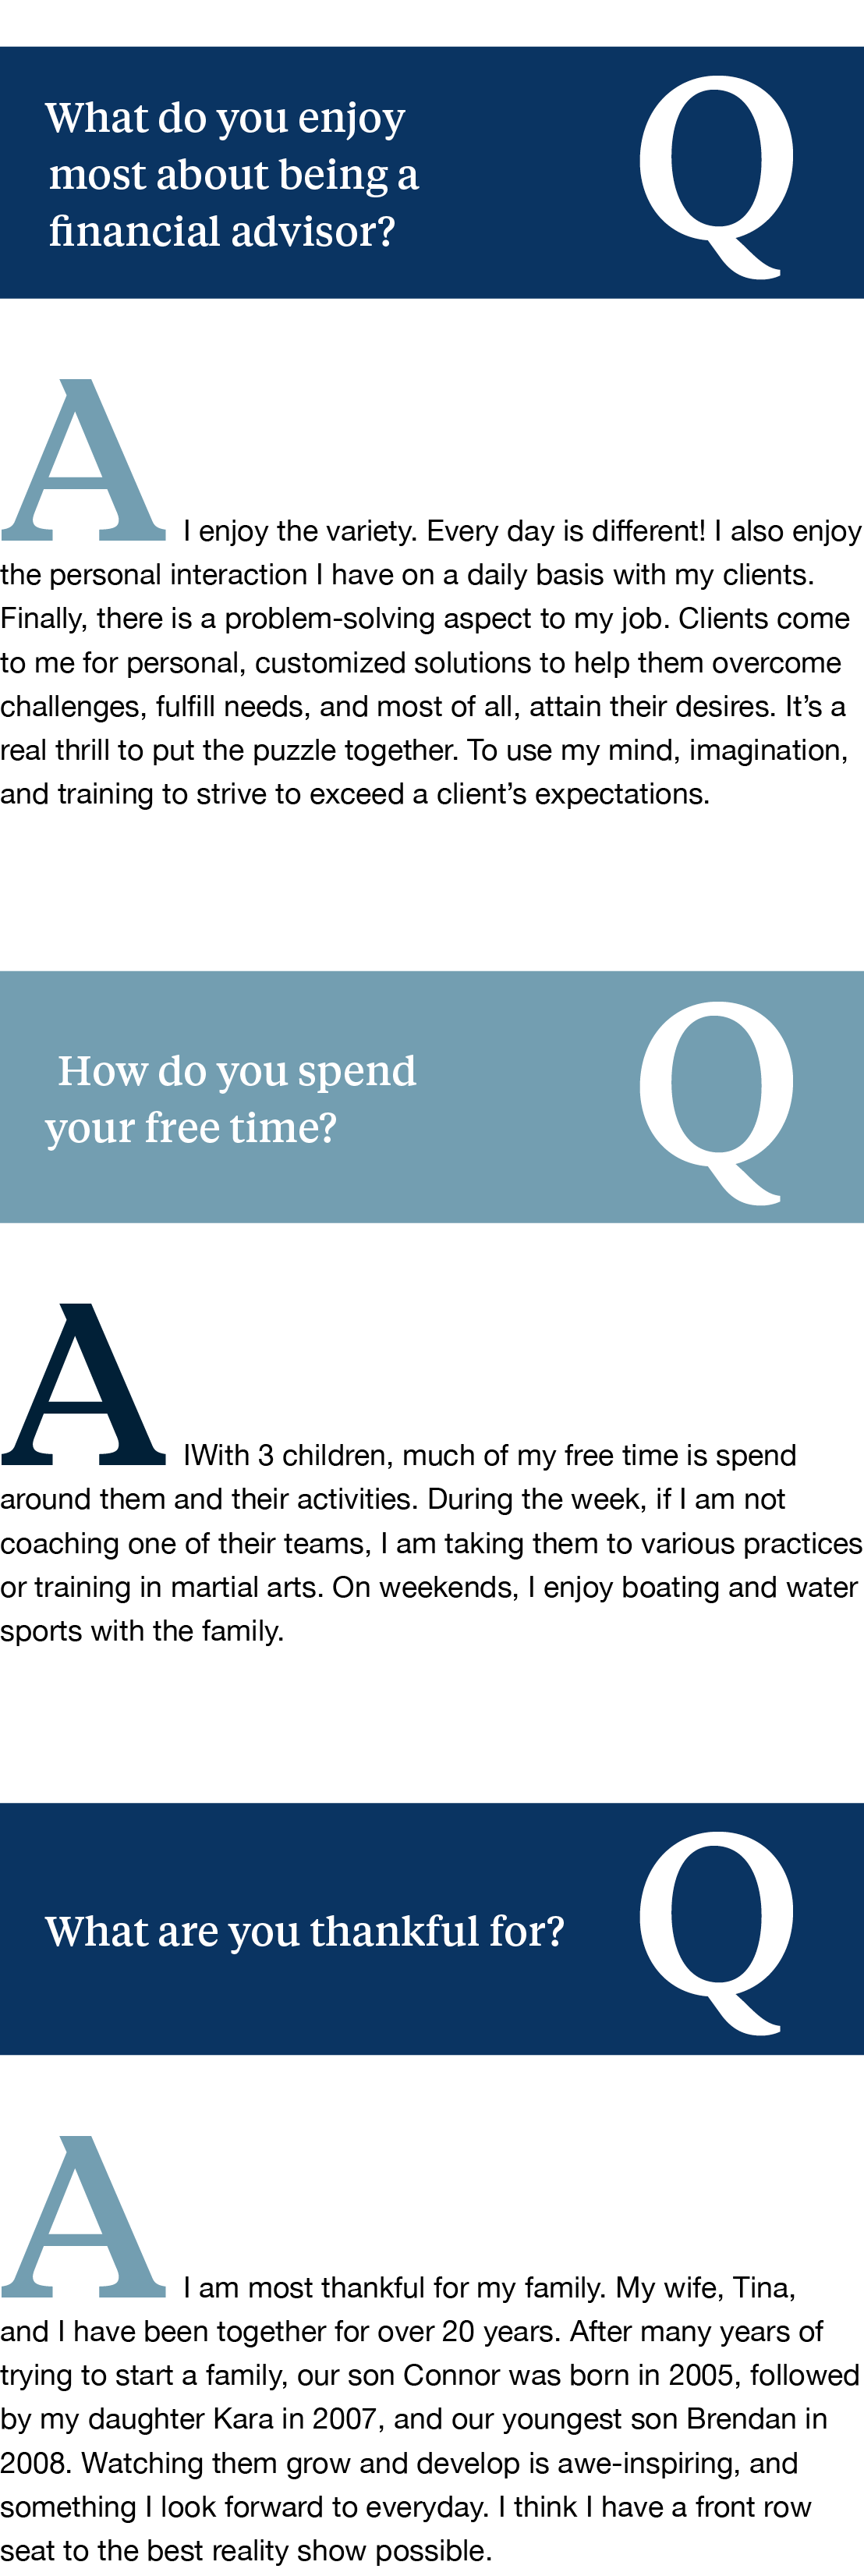 paul q and a 2.png